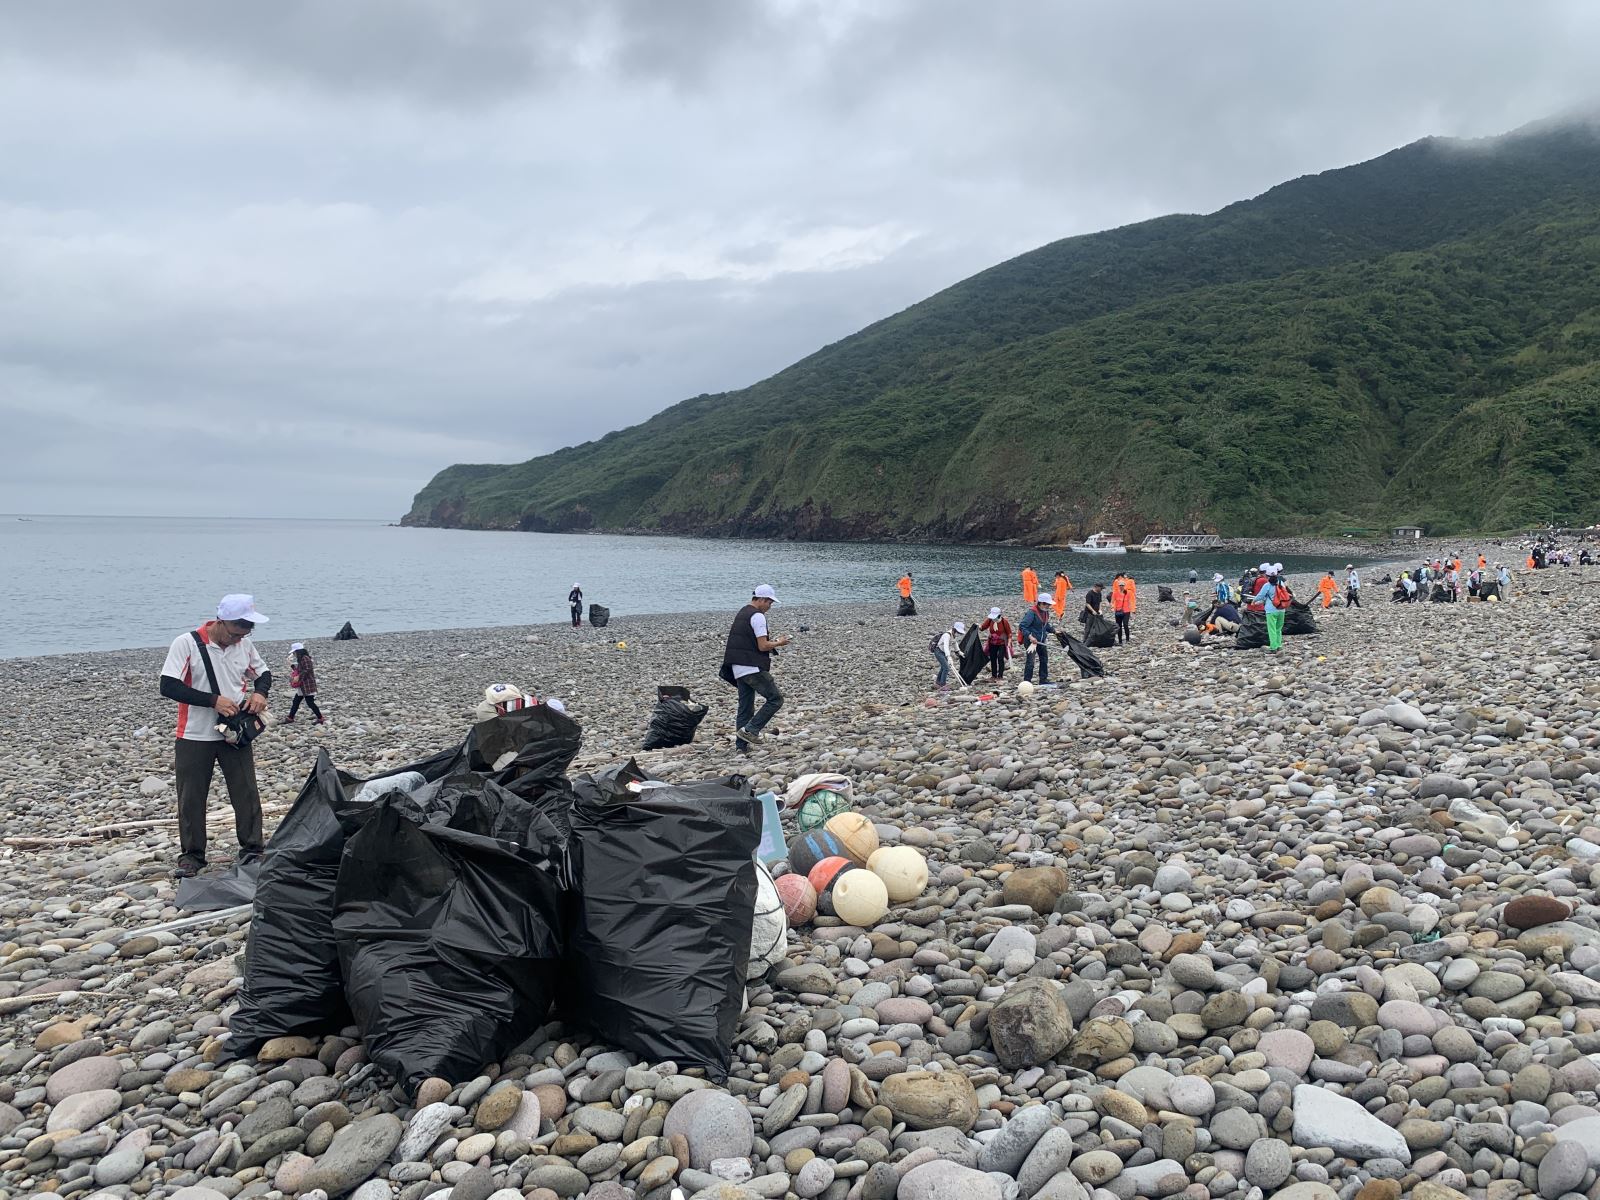 Pick up garbage in a clean beach